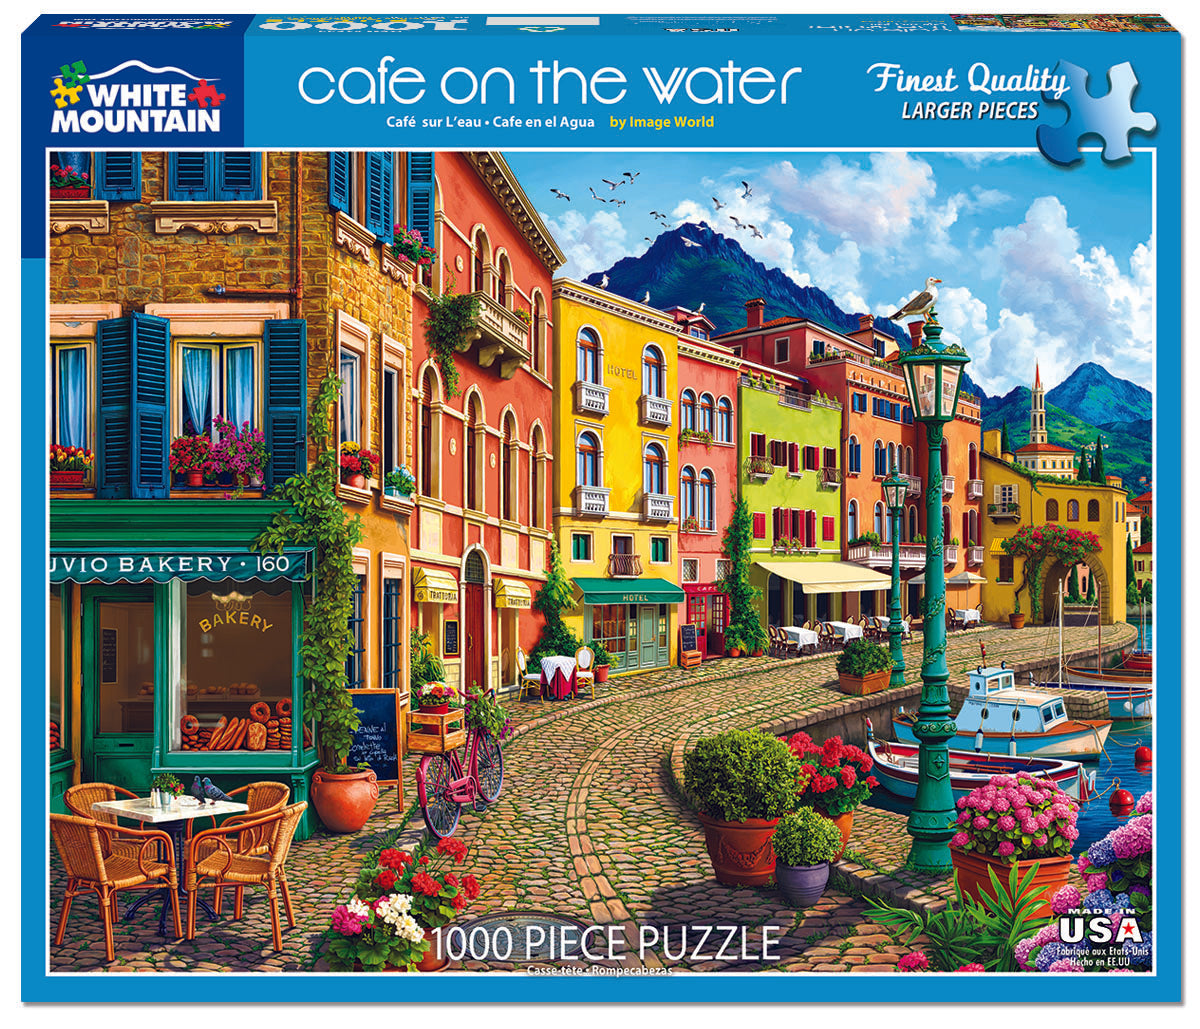 Piece Jigsaw Cafe on The Water – White Mountain Puzzles